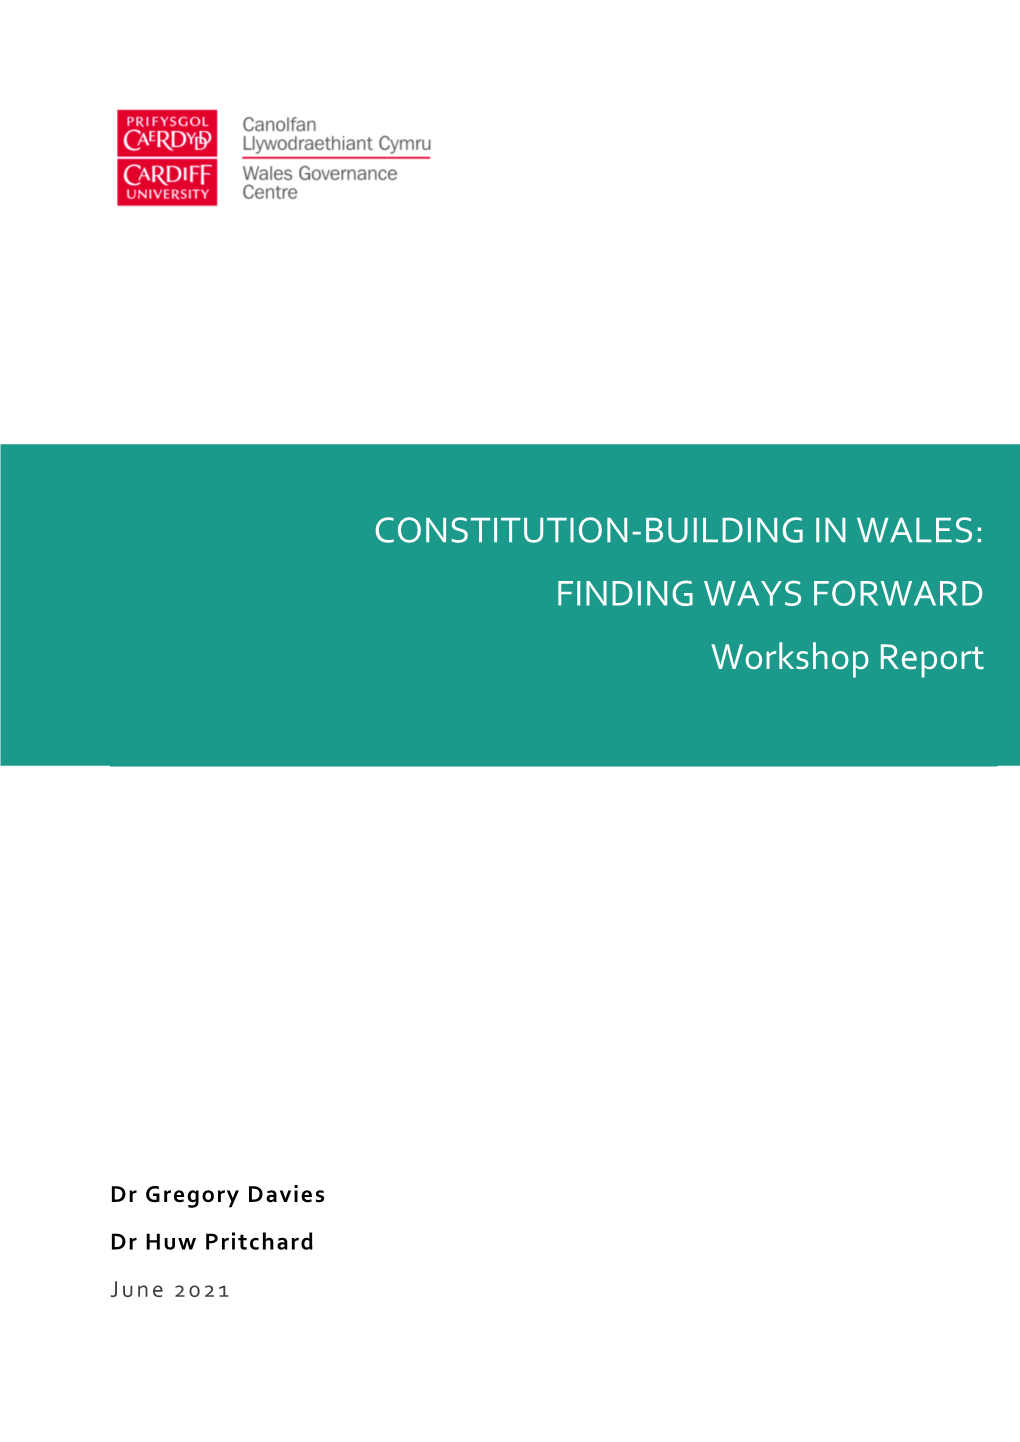 CONSTITUTION-BUILDING in WALES: FINDING WAYS FORWARD Workshop Report